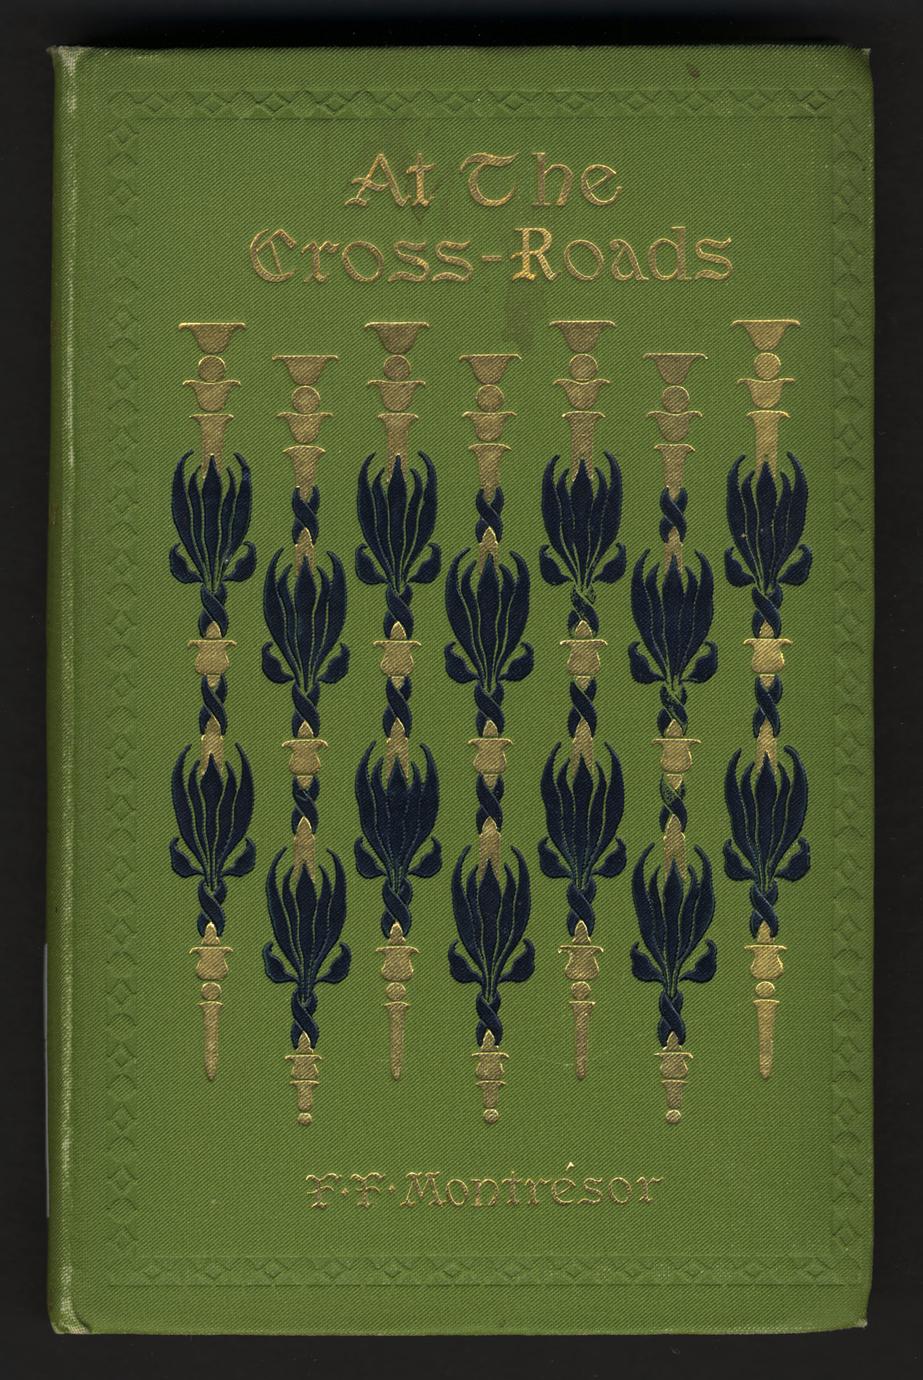 At the cross-roads (1 of 2)